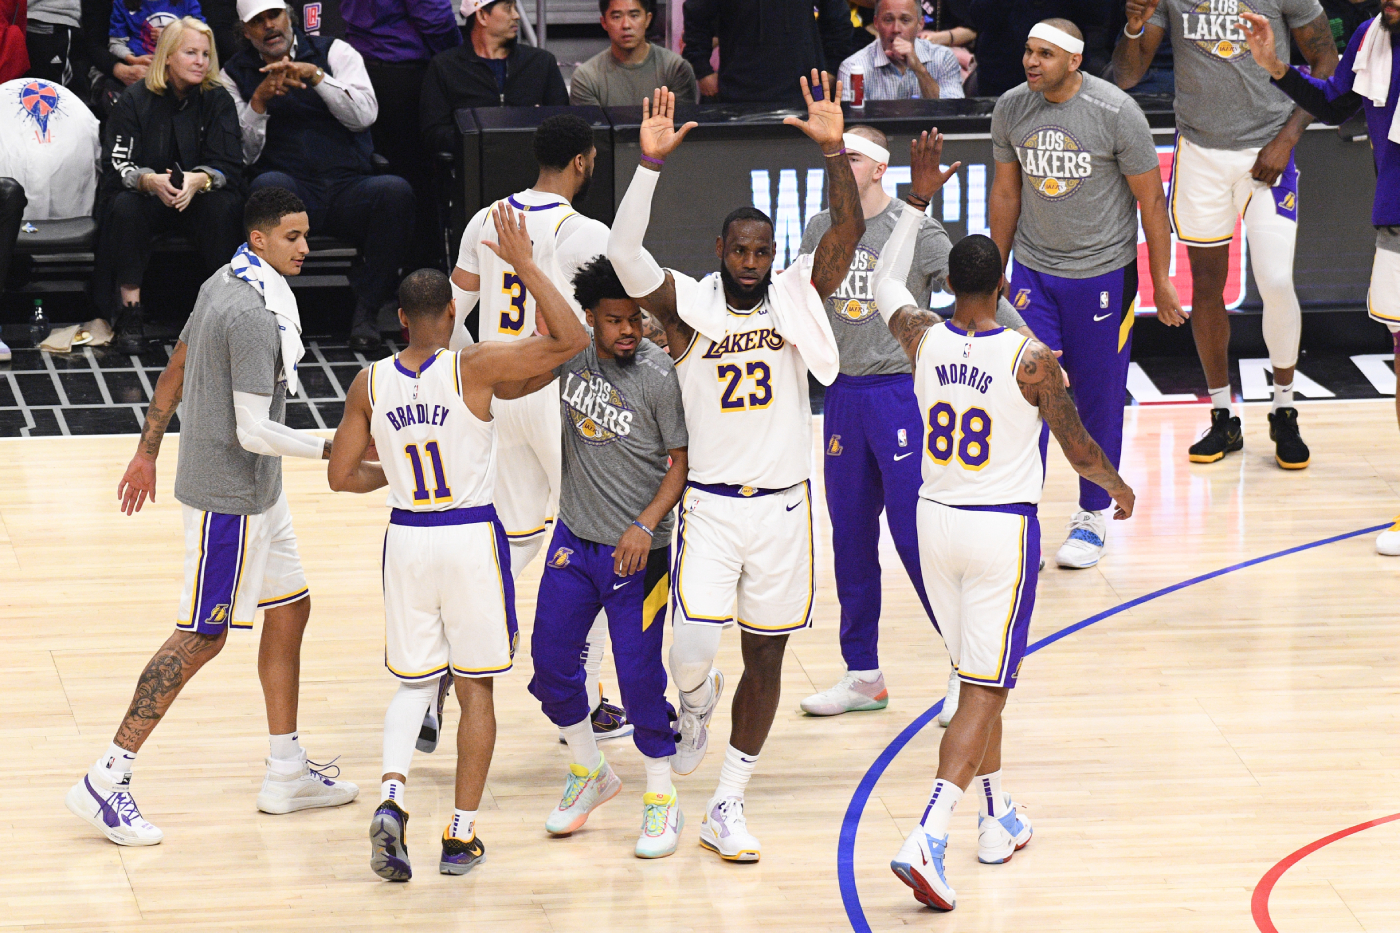 While the Los Angeles Lakers prepare to resume their season, one Lakers player not named LeBron James or Anthony Davis is dominating.